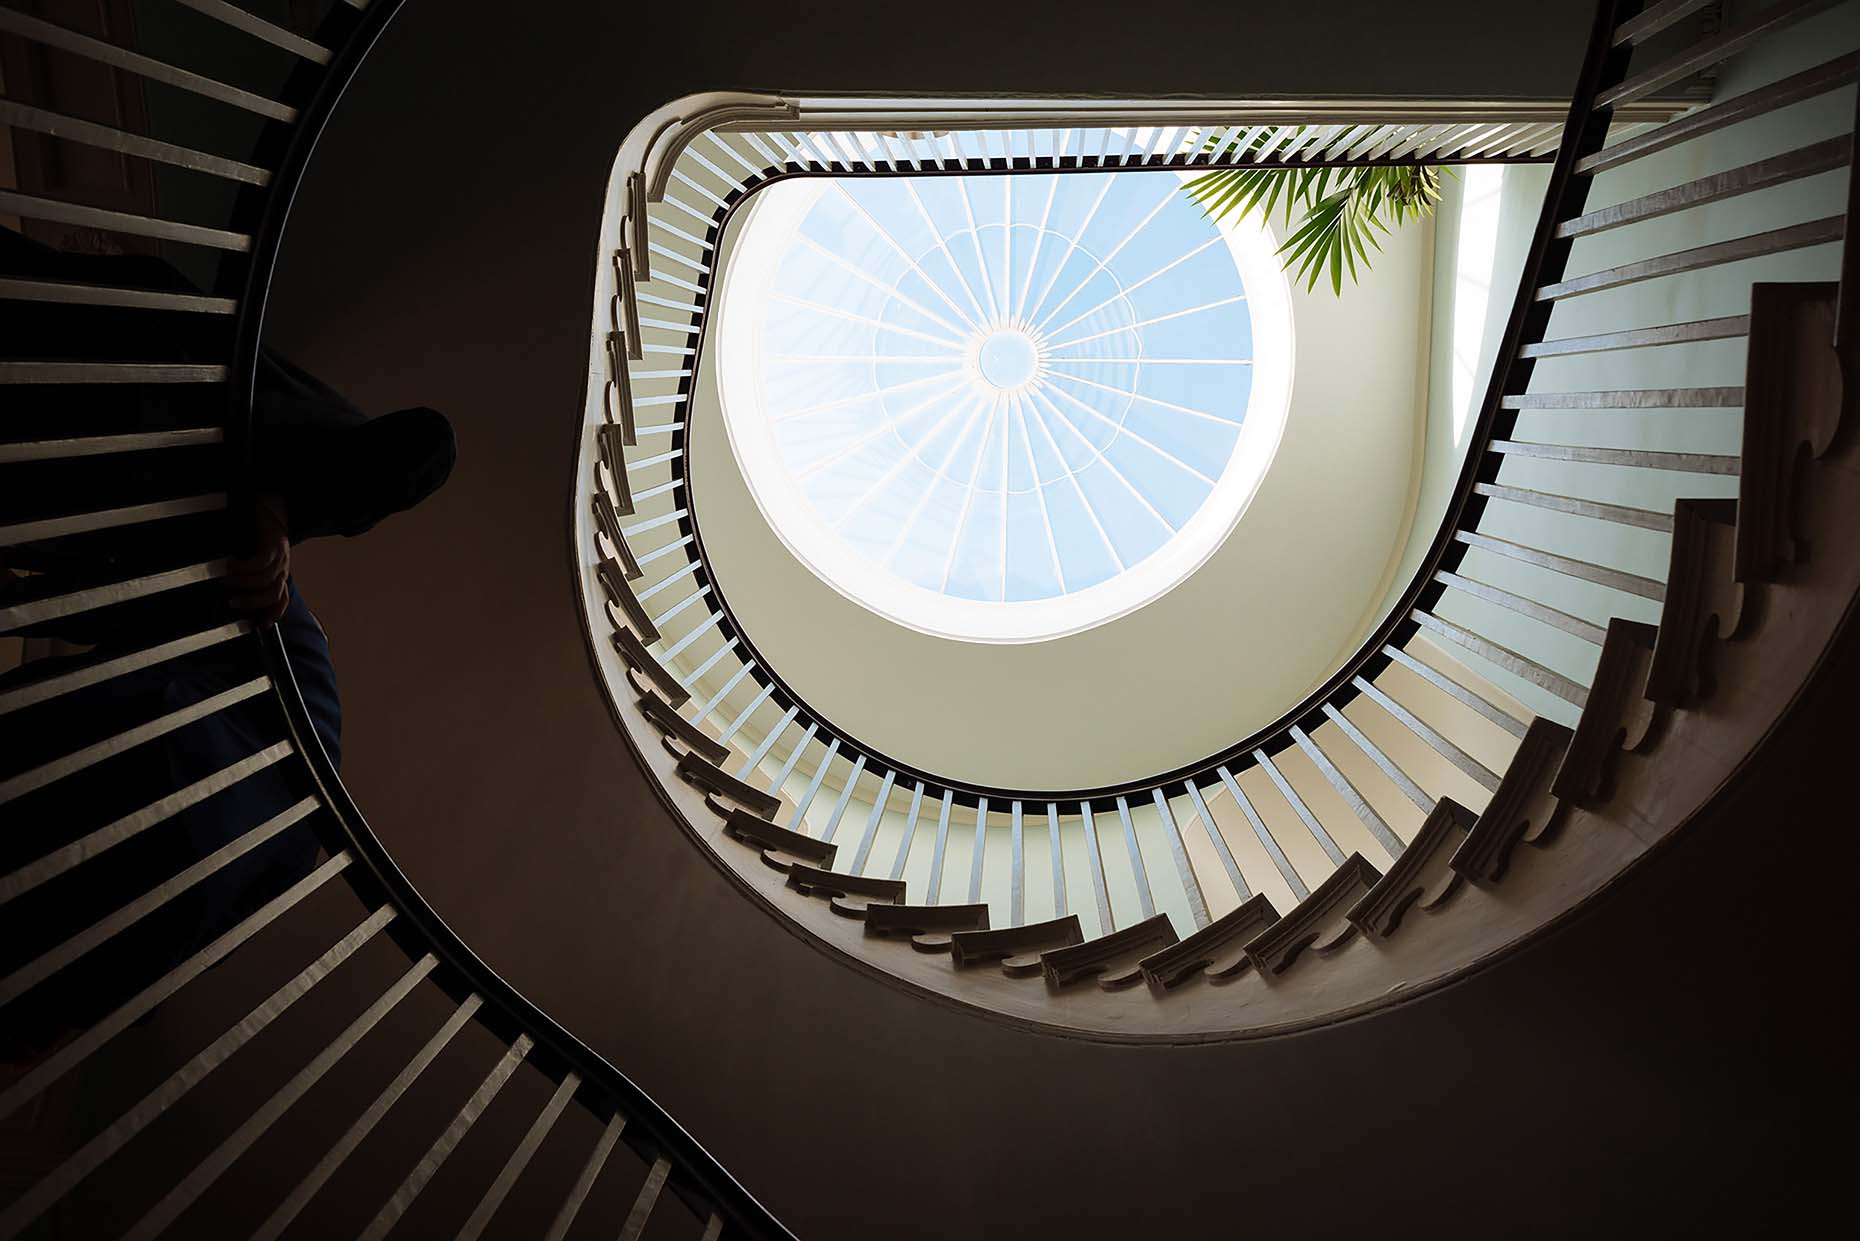 stoke-newington-hall-spiral-staircase-interior-architecture-clissold-house-weddings-39